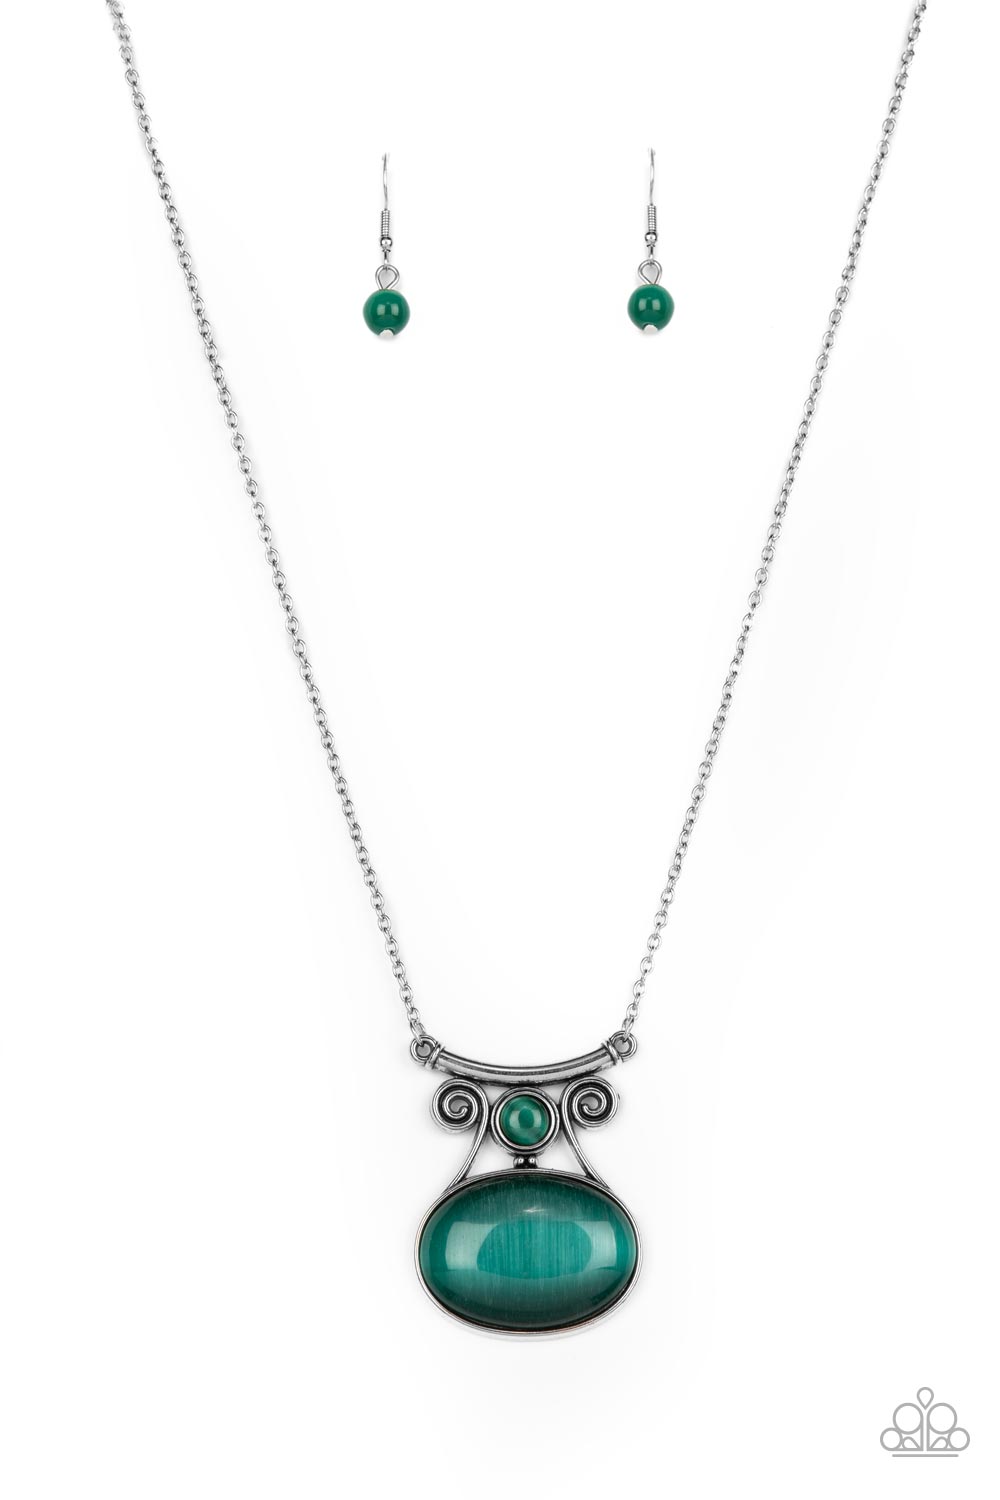 One DAYDREAM At A Time - Green Oversized Cat's Eye Stone Pendant Paparazzi Necklace & matching earrings